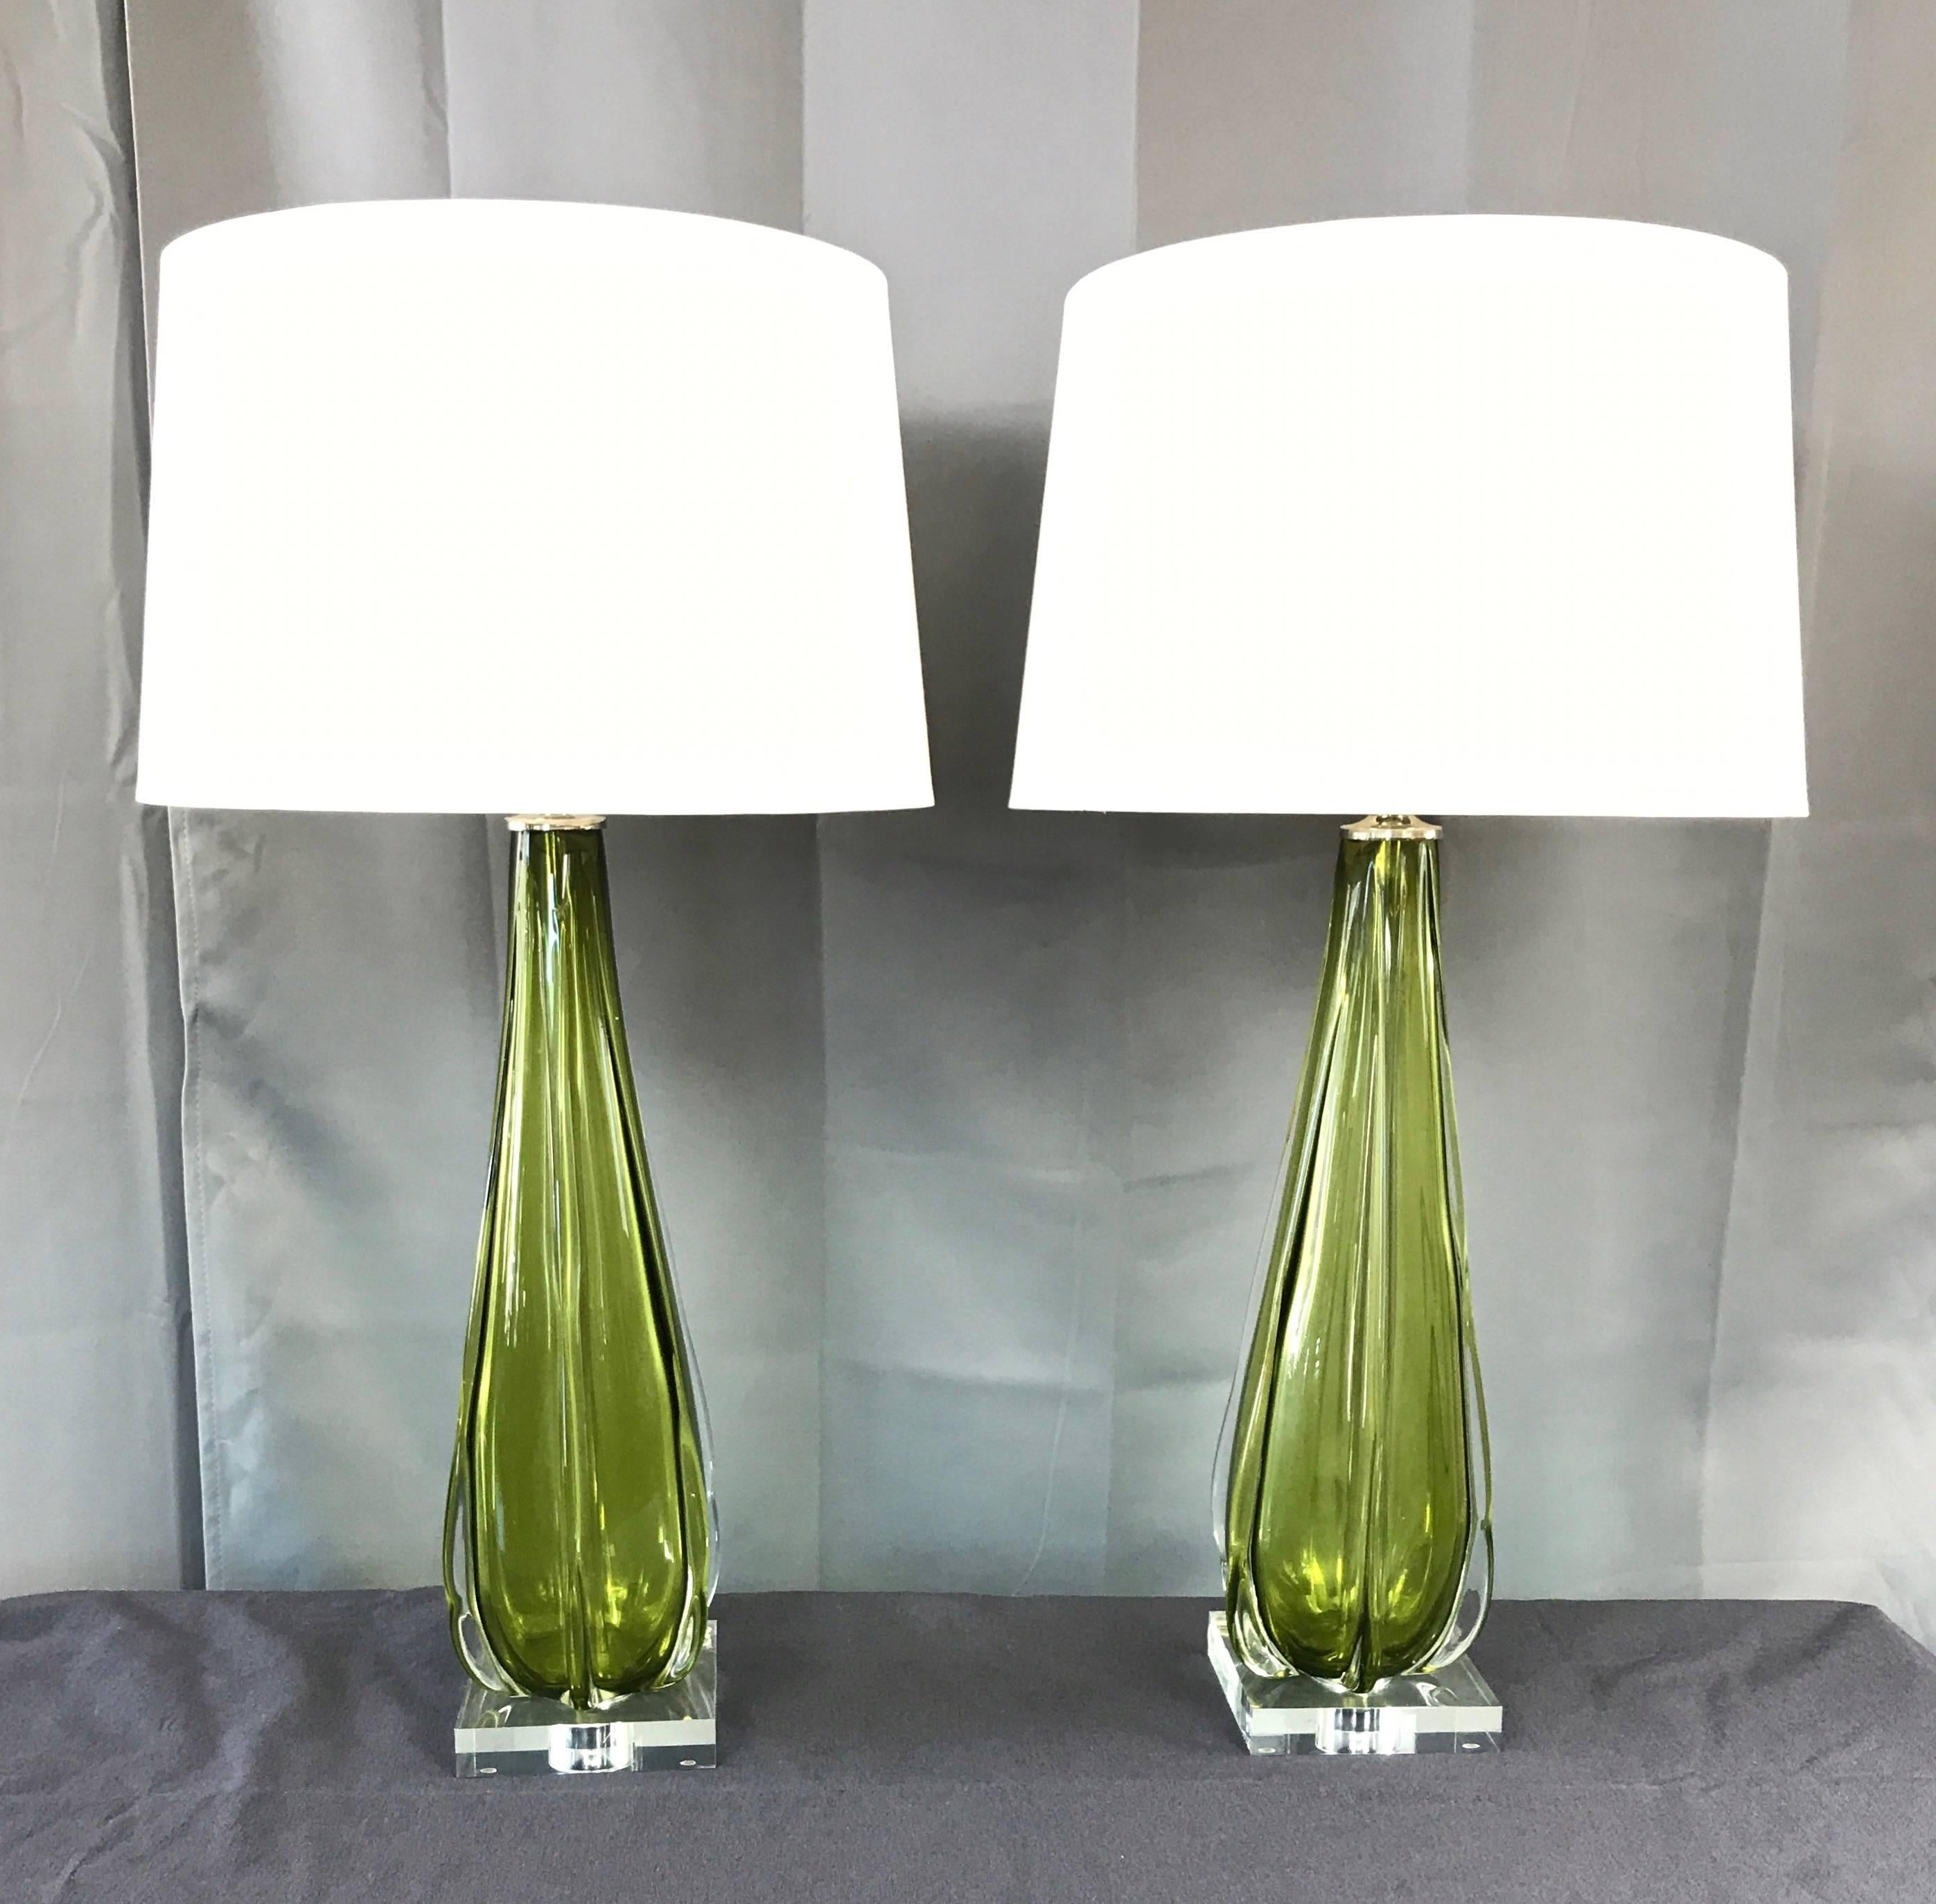 An especially elegant and tall pair of Murano glass table lamps with vintage bodies by Seguso on contemporary Lucite bases.

Absolutely beautiful handblown Sommerso form features a luminous green tourmaline-colored interior encased in sculptural